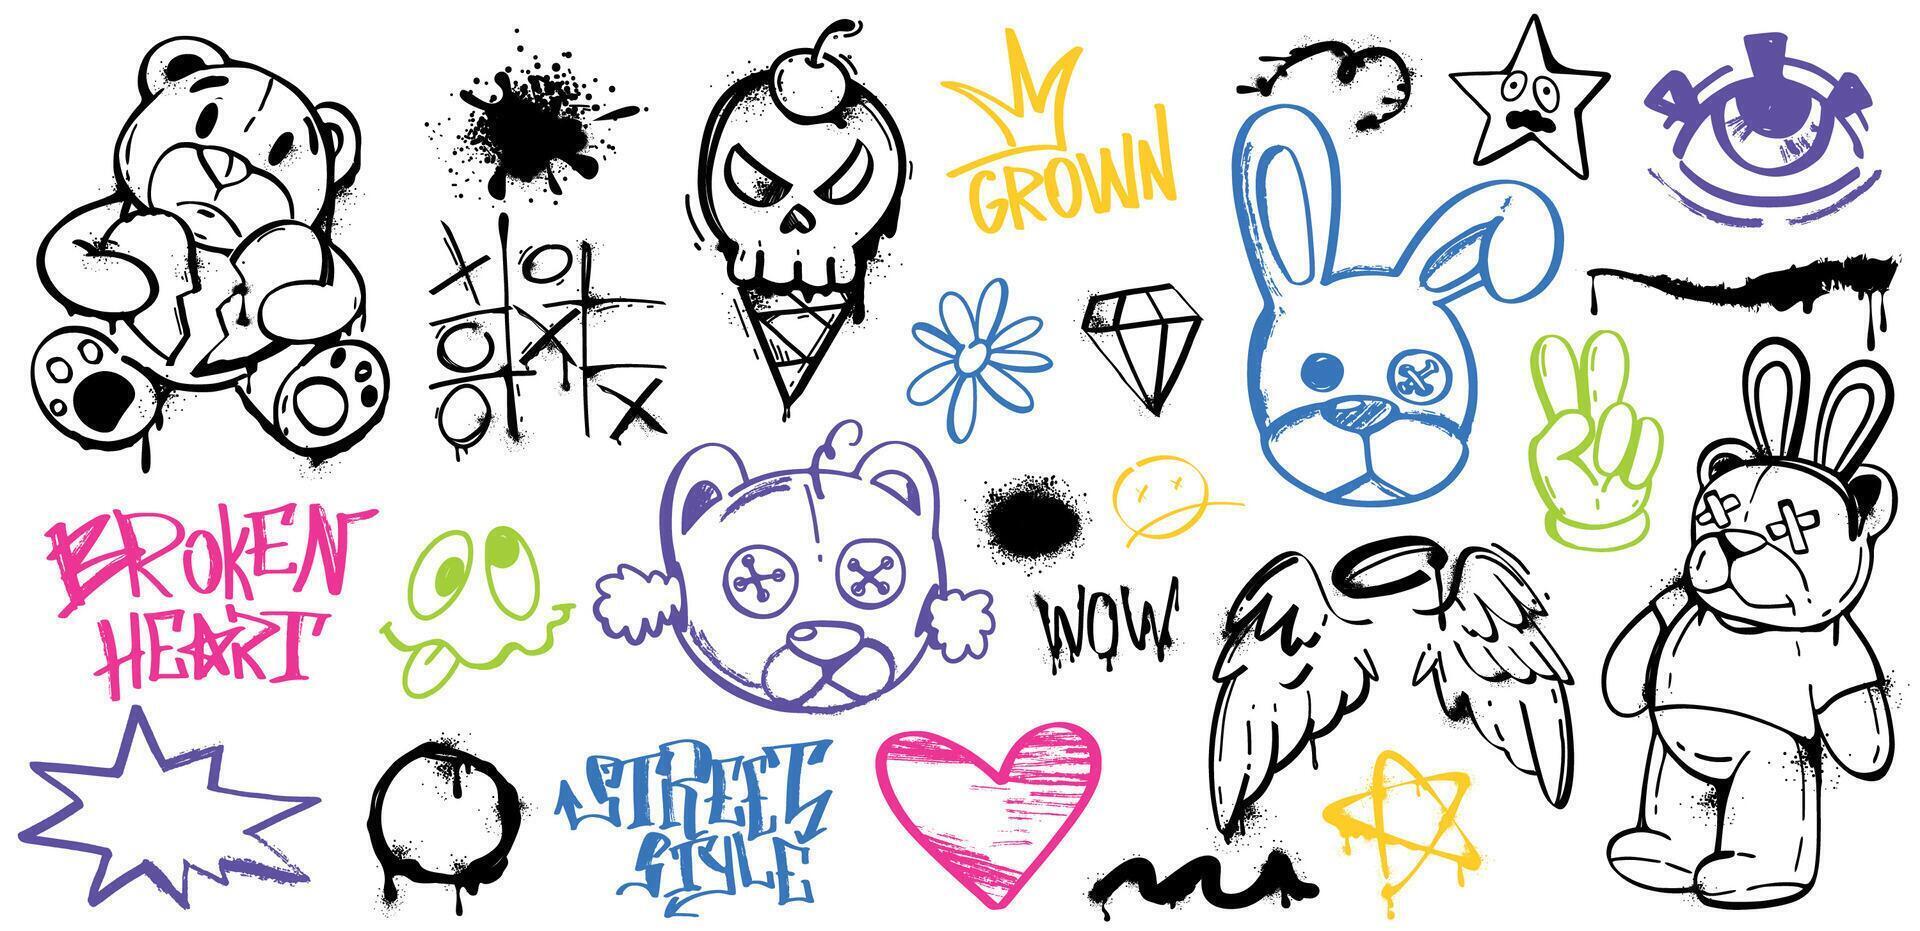 Spray paint graffiti element set of bear, rabbit, heart, skull, angel wings, eye, stars, tic tac toe and cool gesture. Grunge ink graphic symbols and color street art tags isolated on white background vector